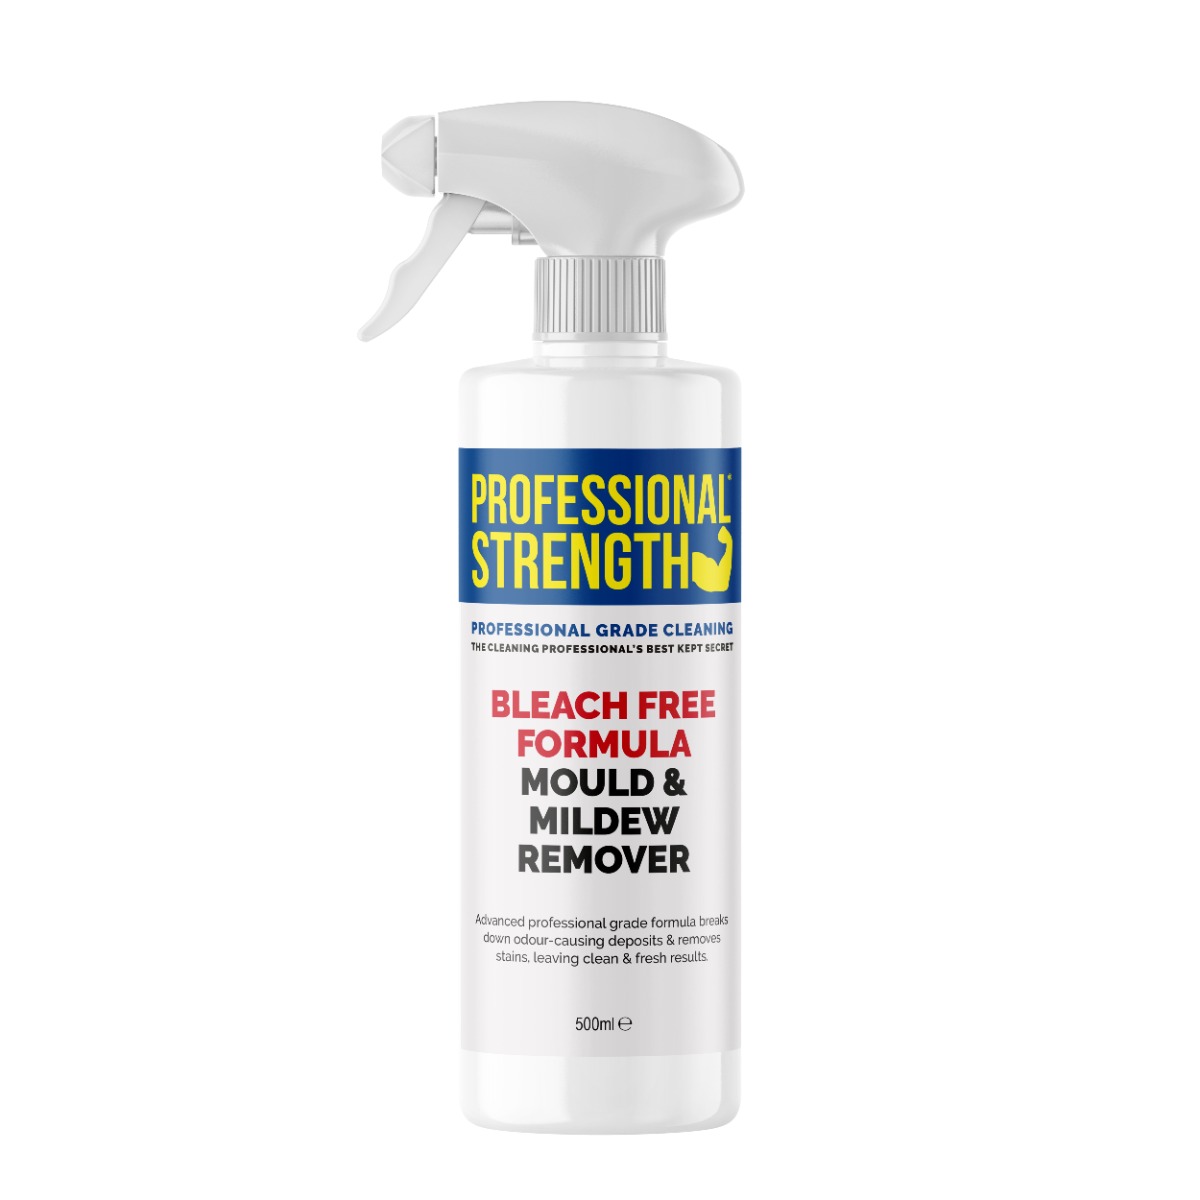 Professional Strength Mould & Mildew Remover - Bleach Free Formula | StressNoMore